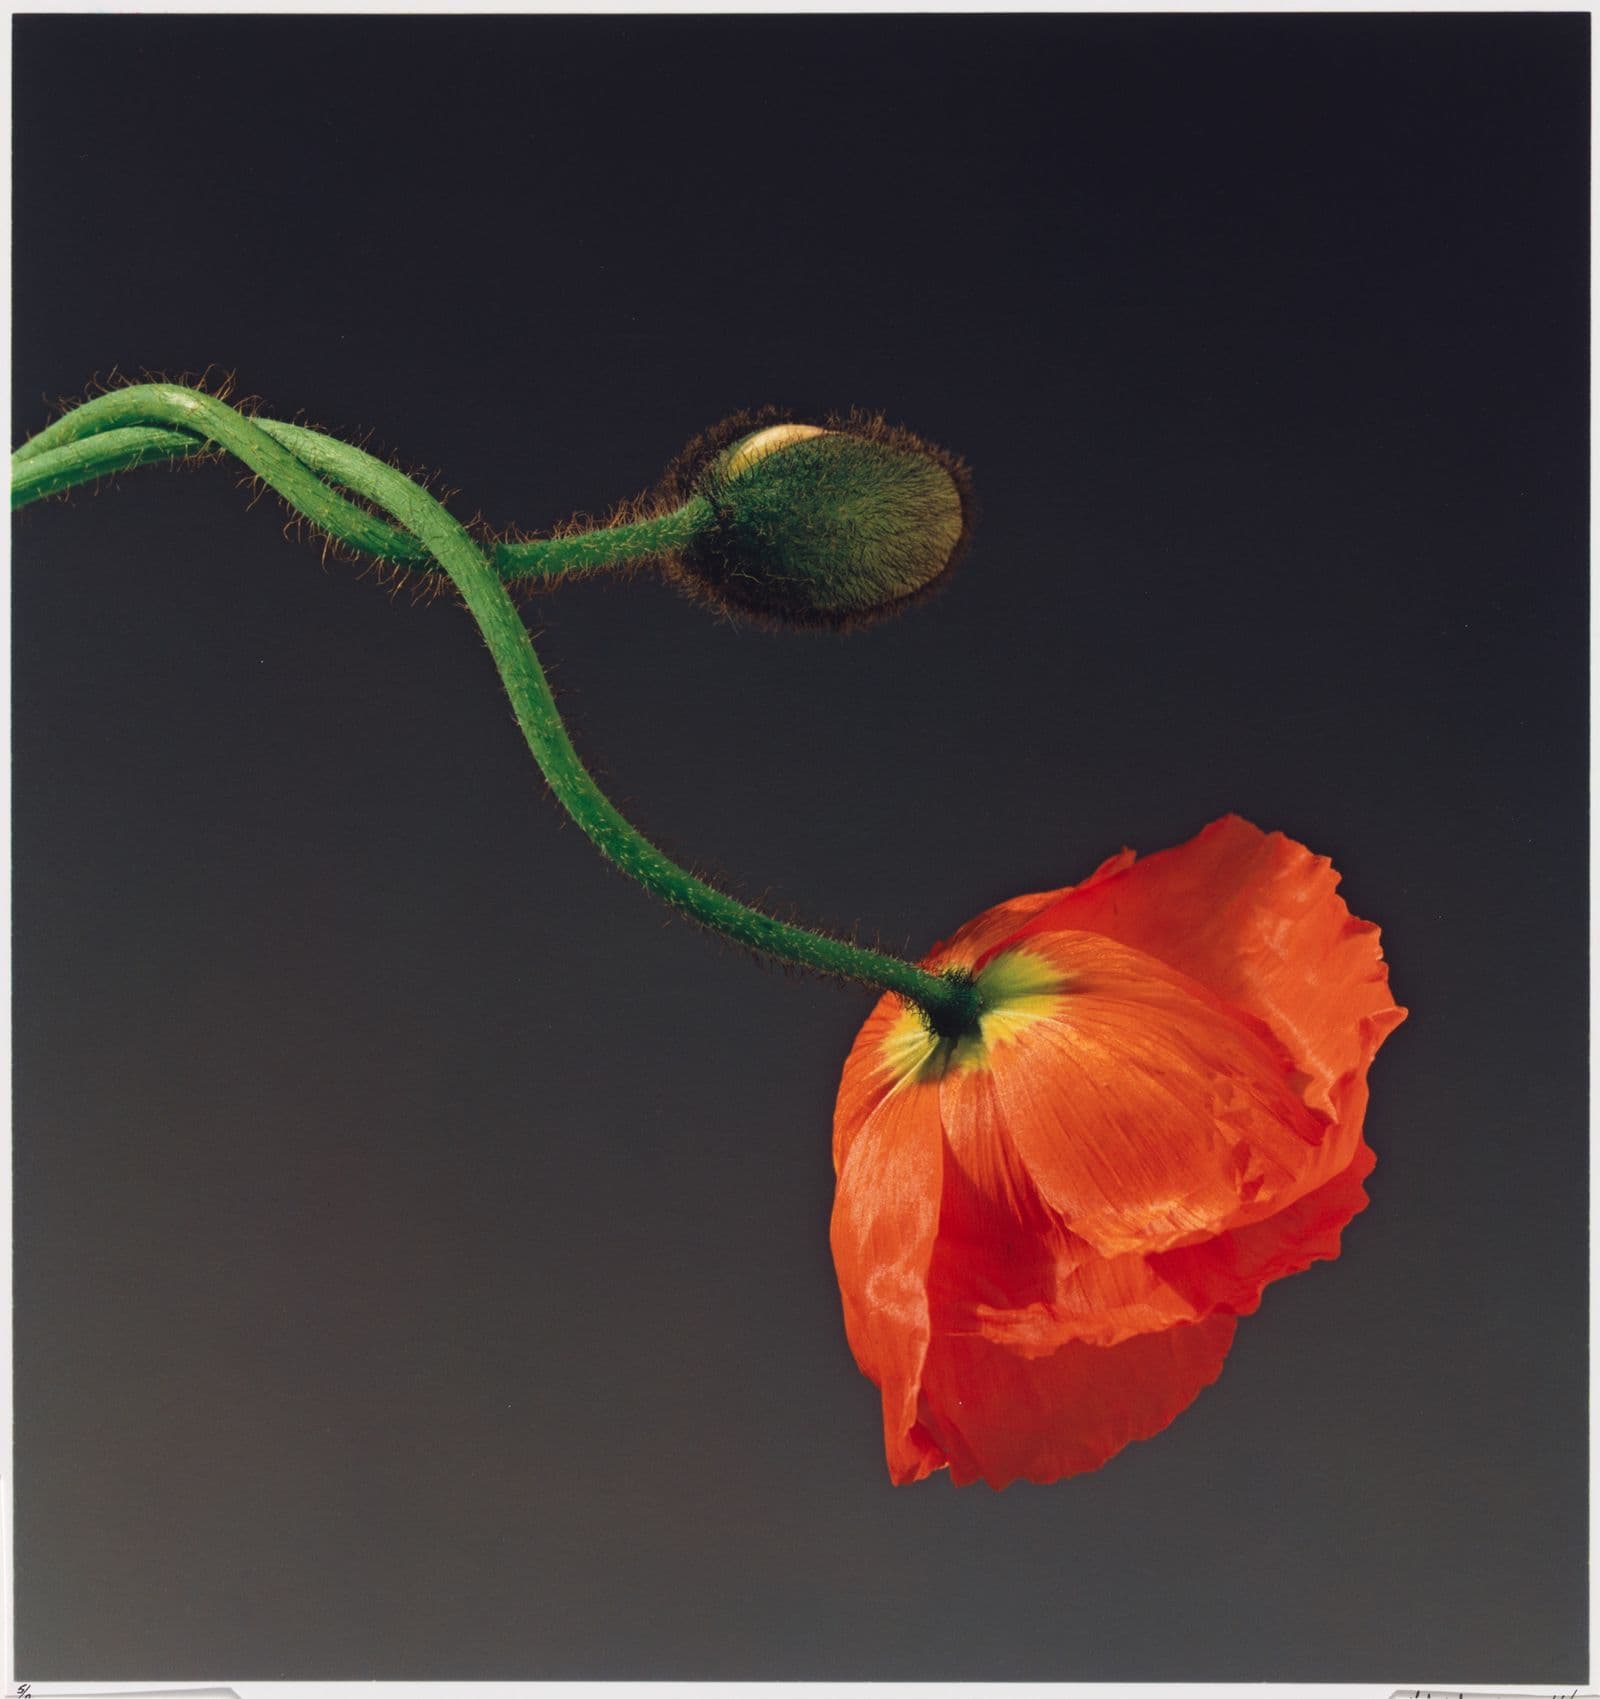 Photograph of red poppy